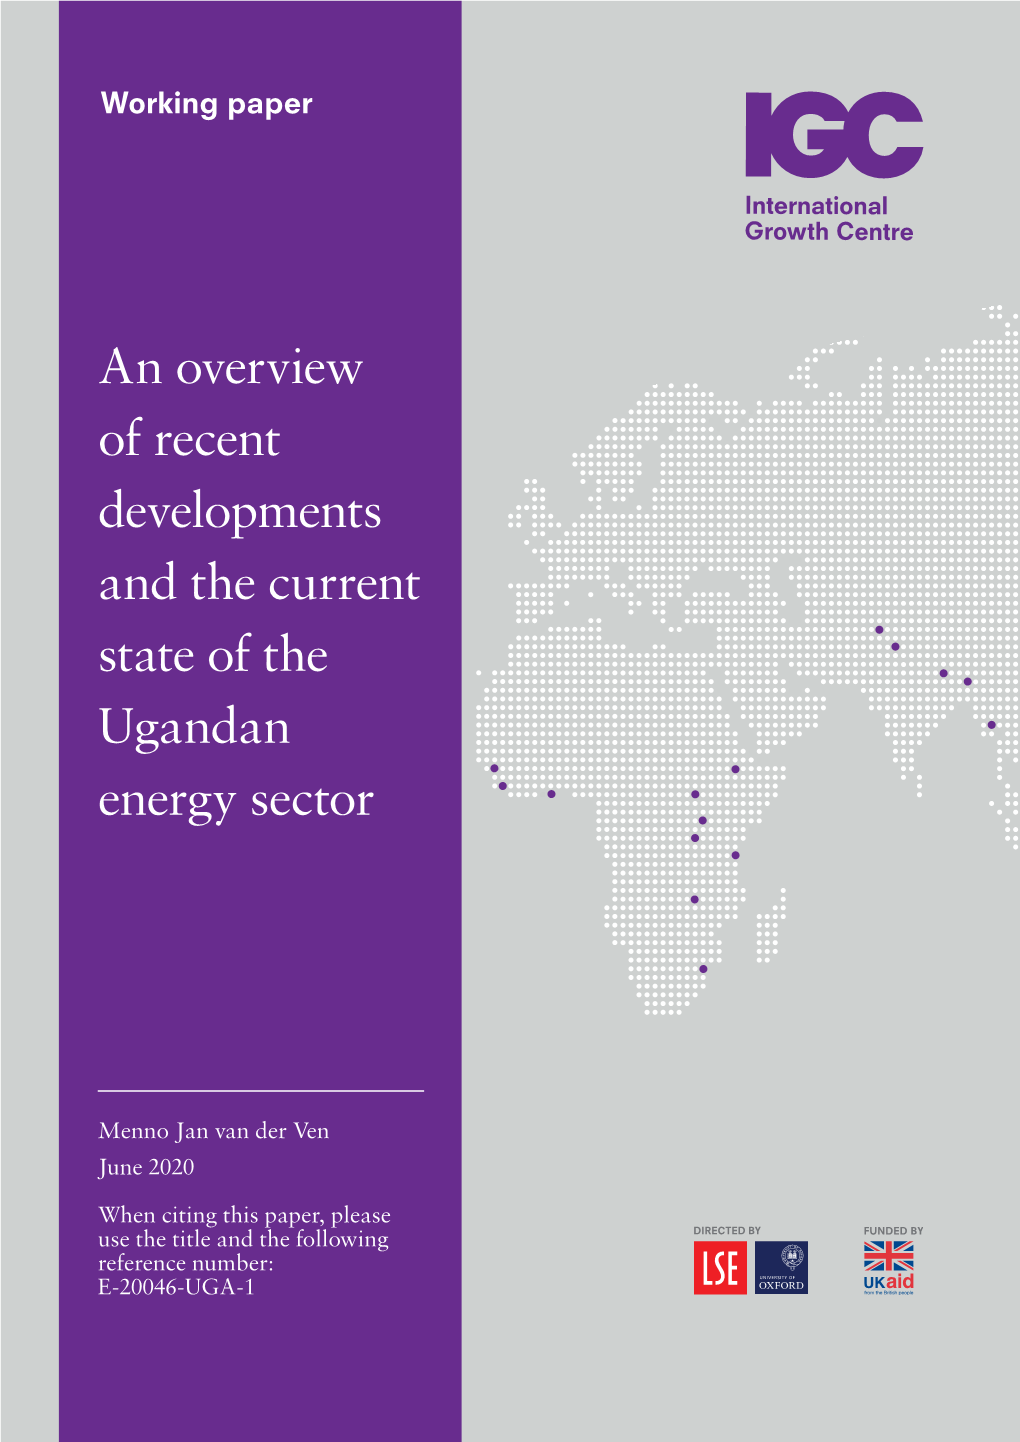 An Overview of Recent Developments and the Current State of the Ugandan Energy Sector